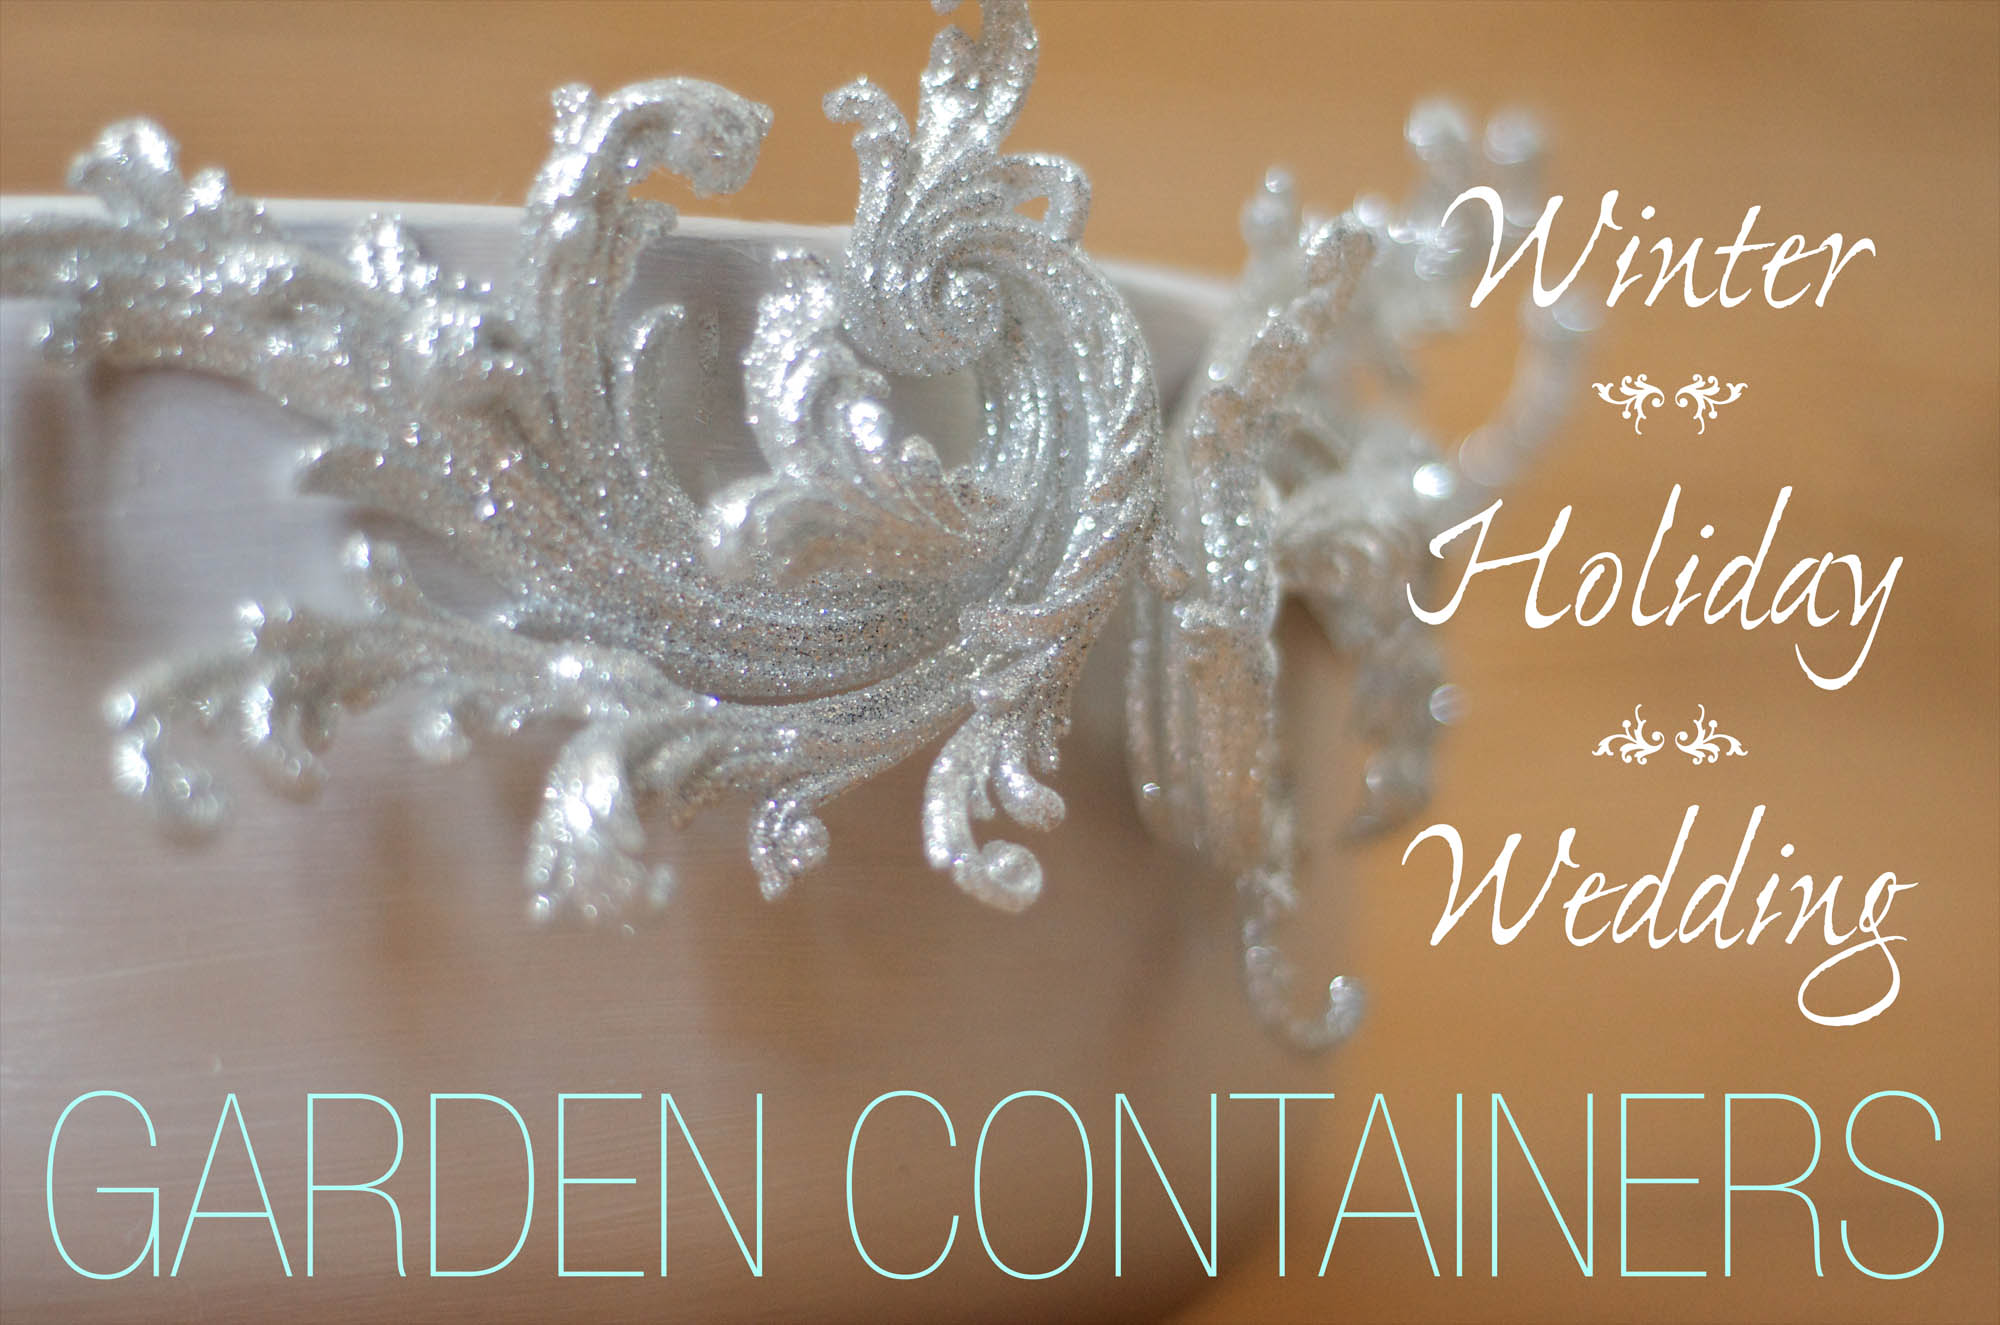 Containers for Winter, Holiday, Wedding Miniature Gardens